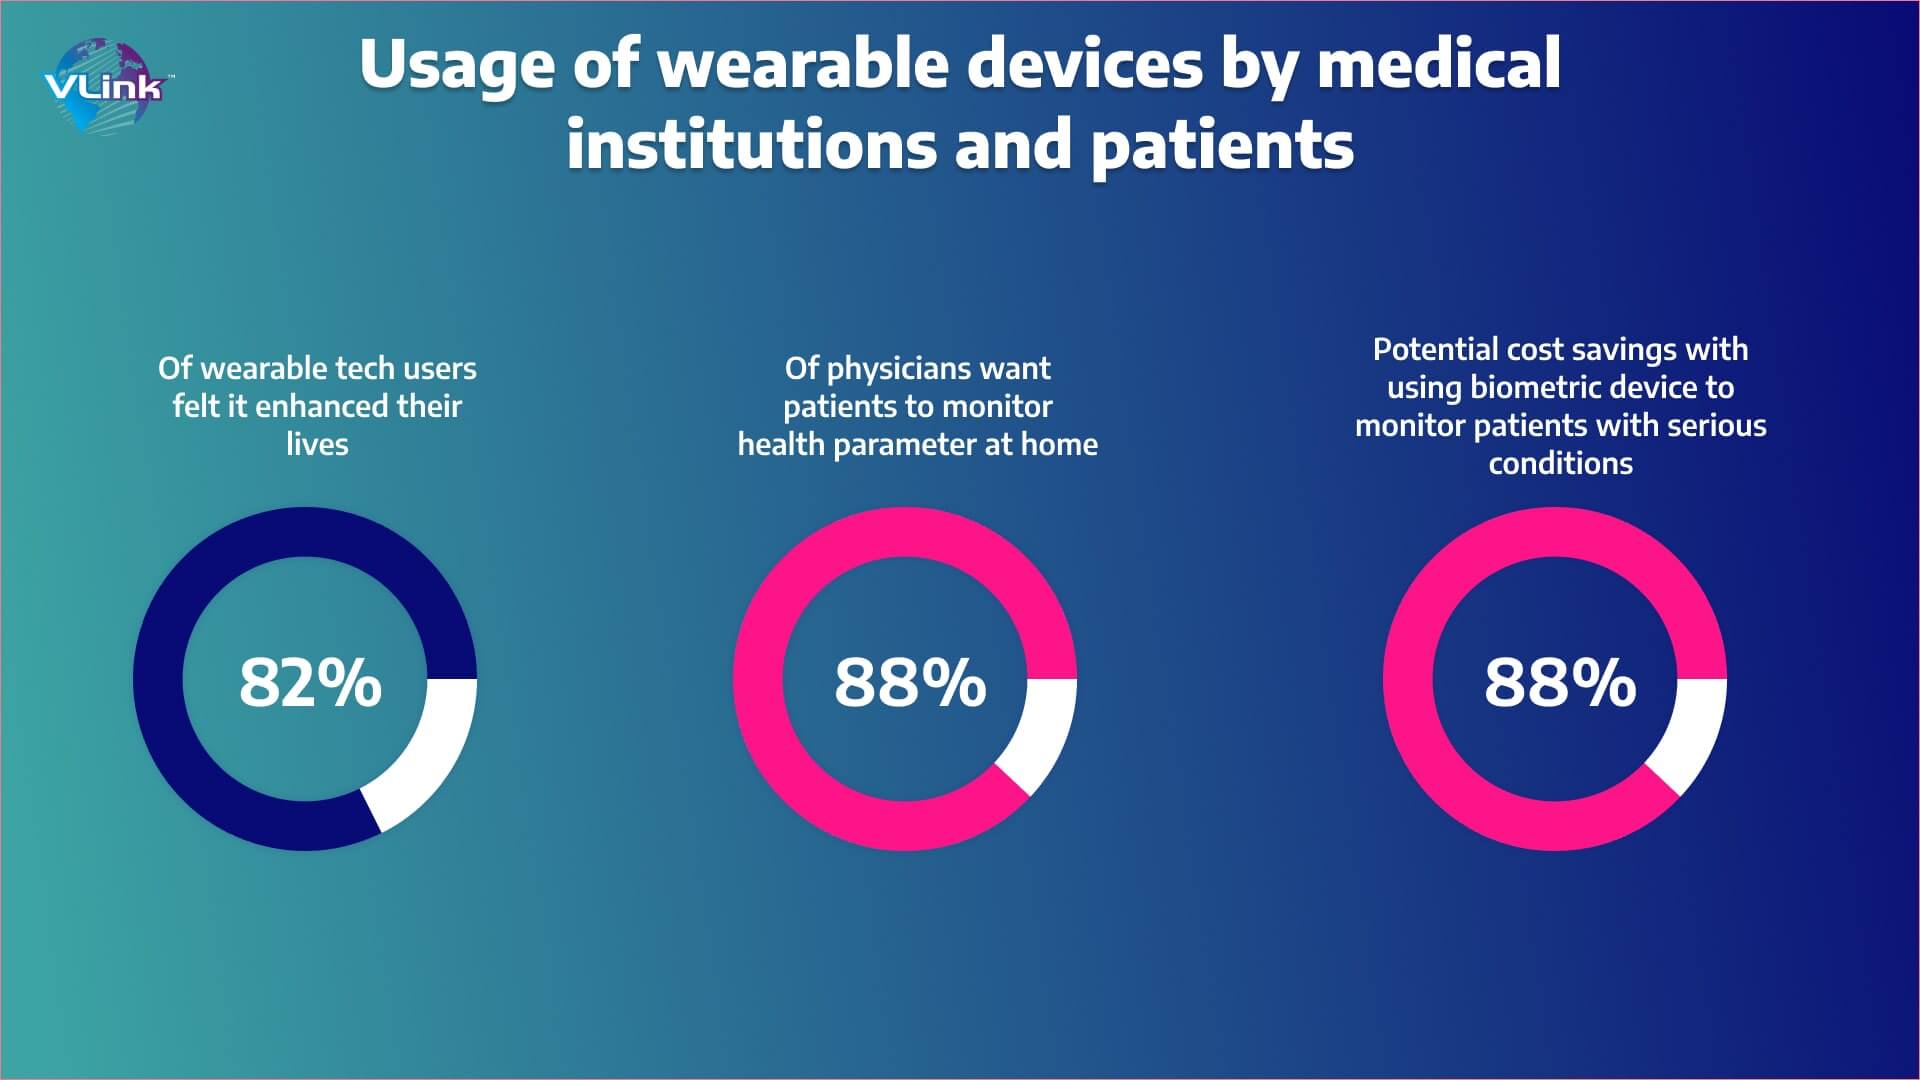 Usage of wearable devices by medical institutions and patients